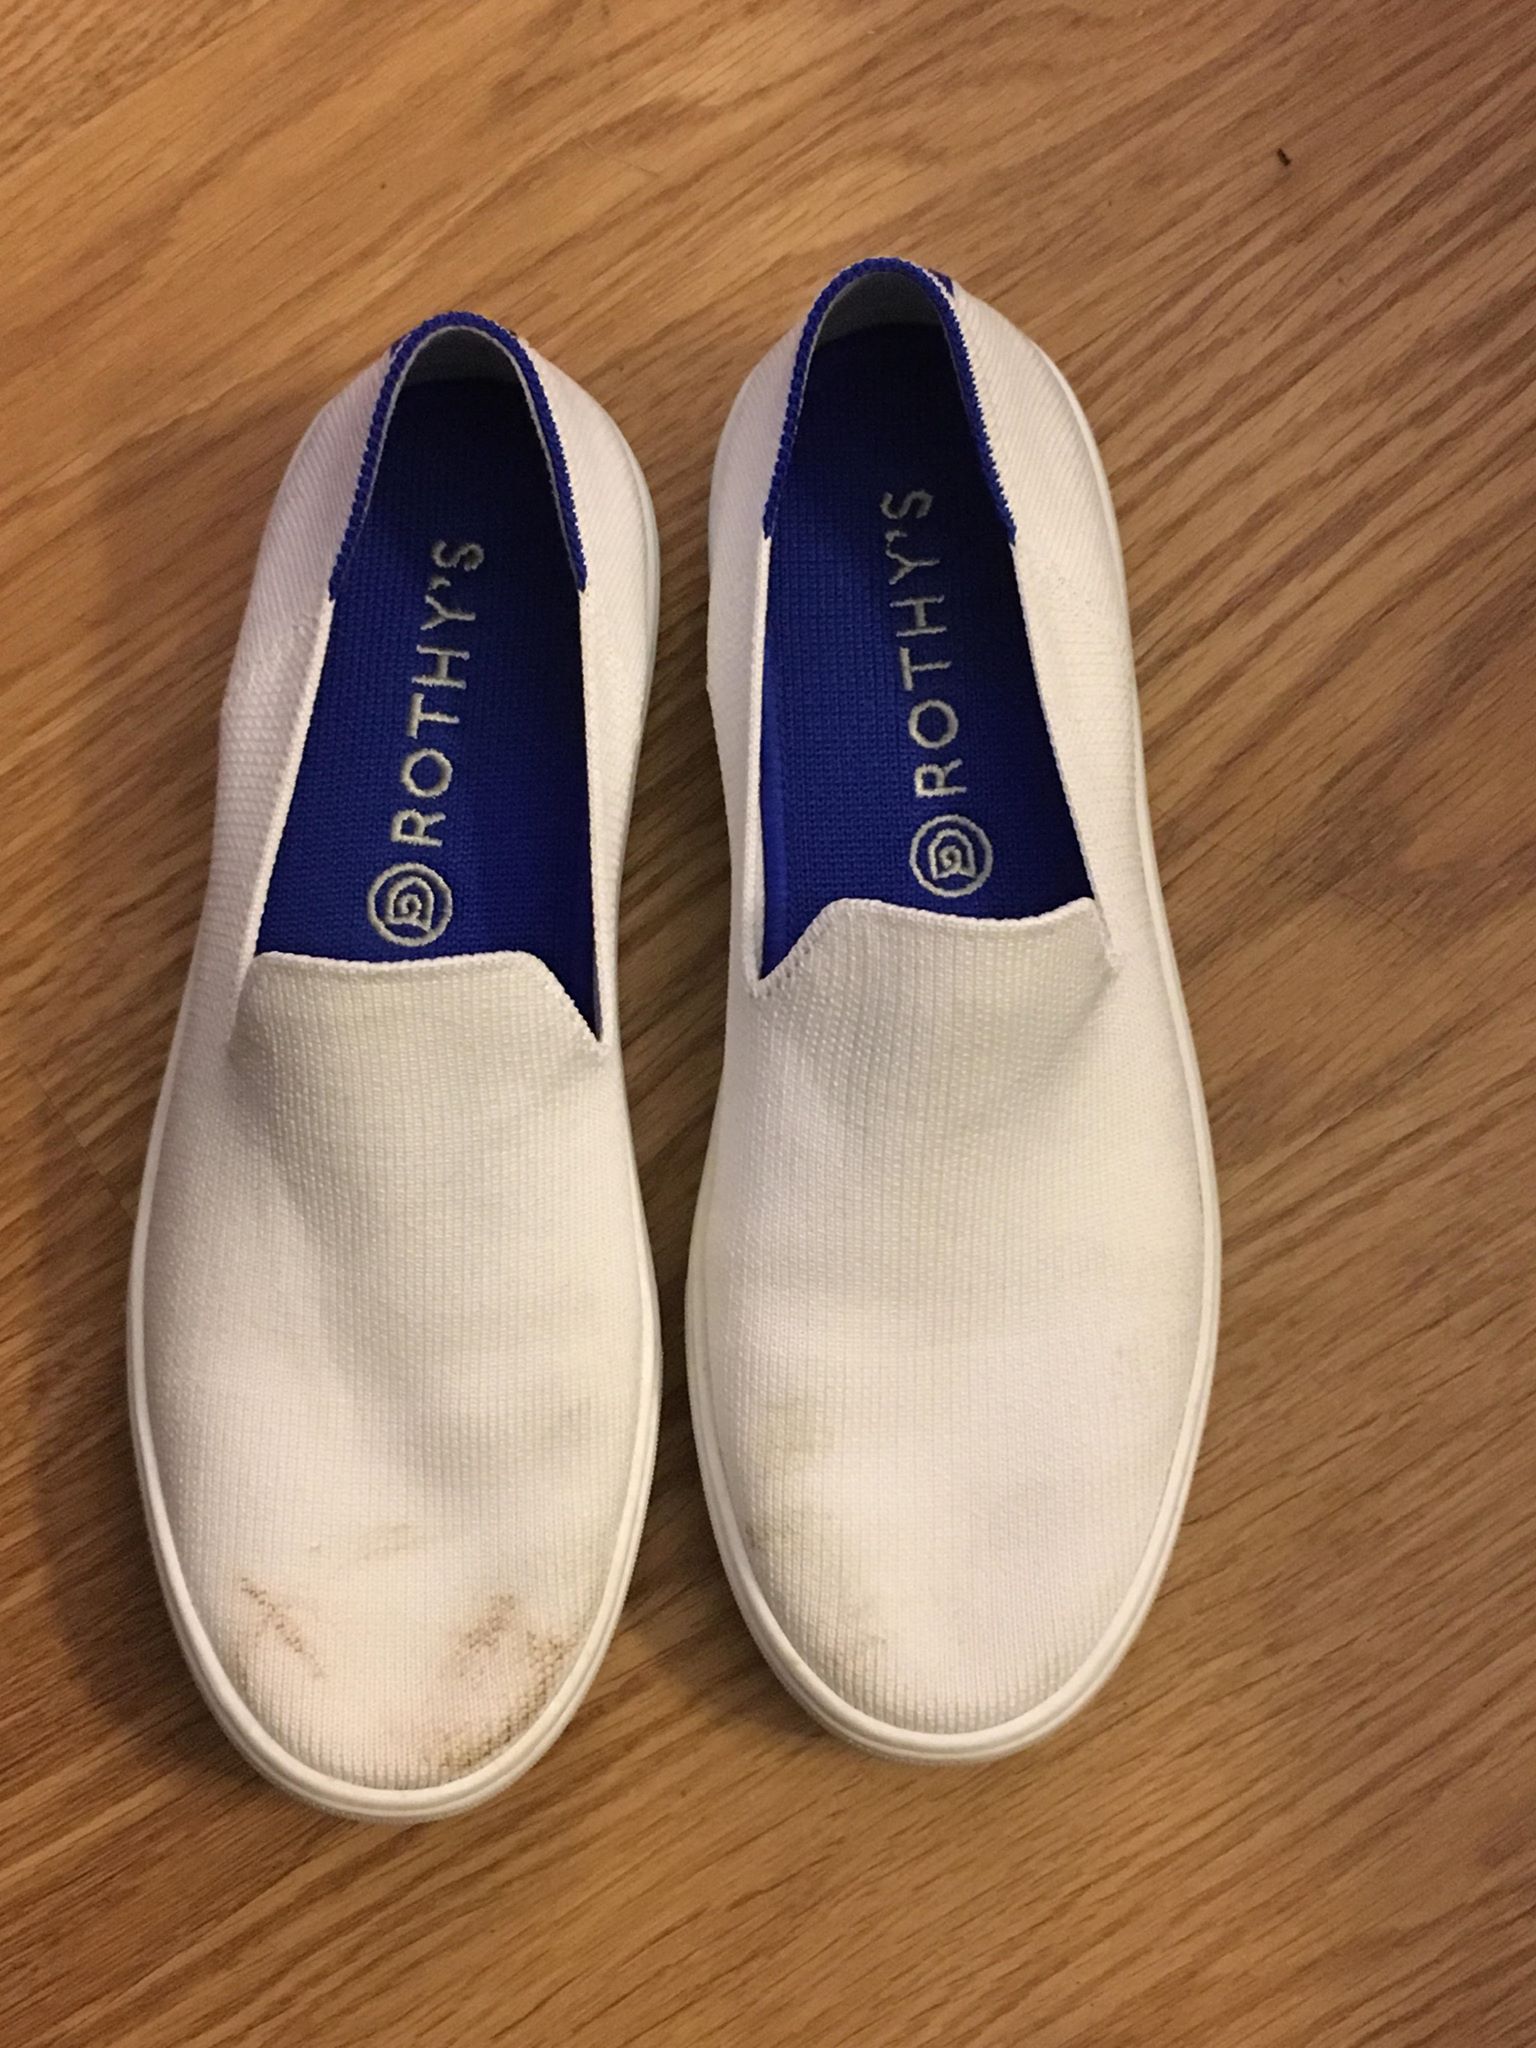 rothys sneaker review